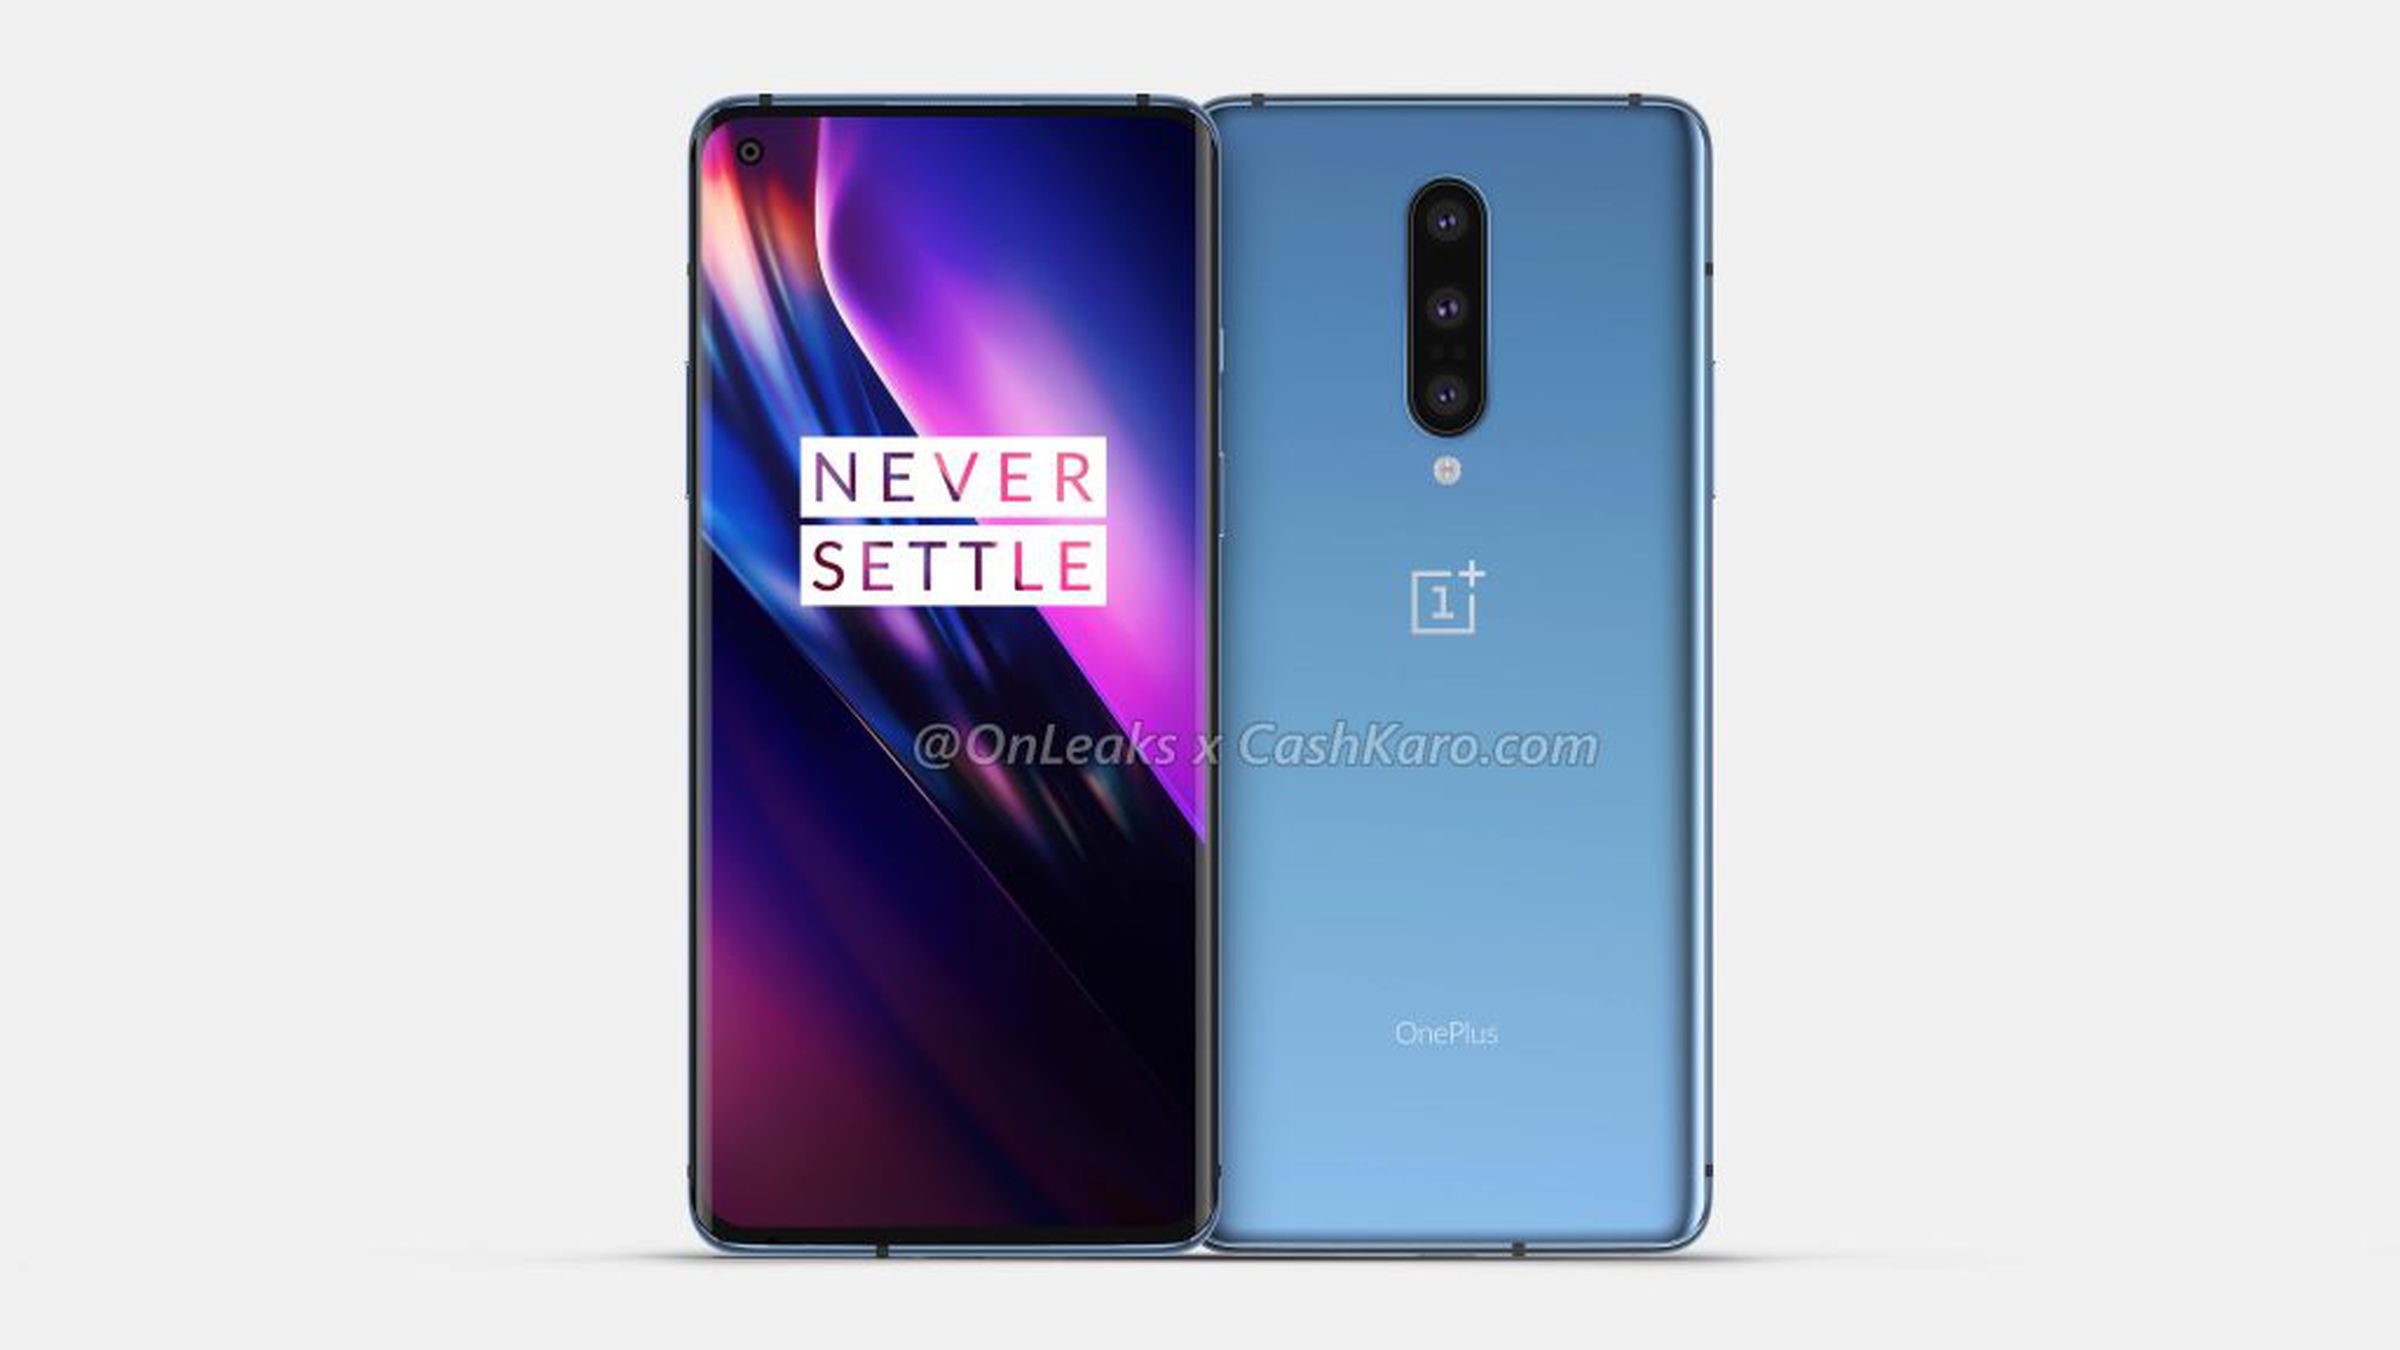 In comparison, leaks suggest the OnePlus 8 (pictured) could come with a similar hole-punch notch and a slightly smaller display.